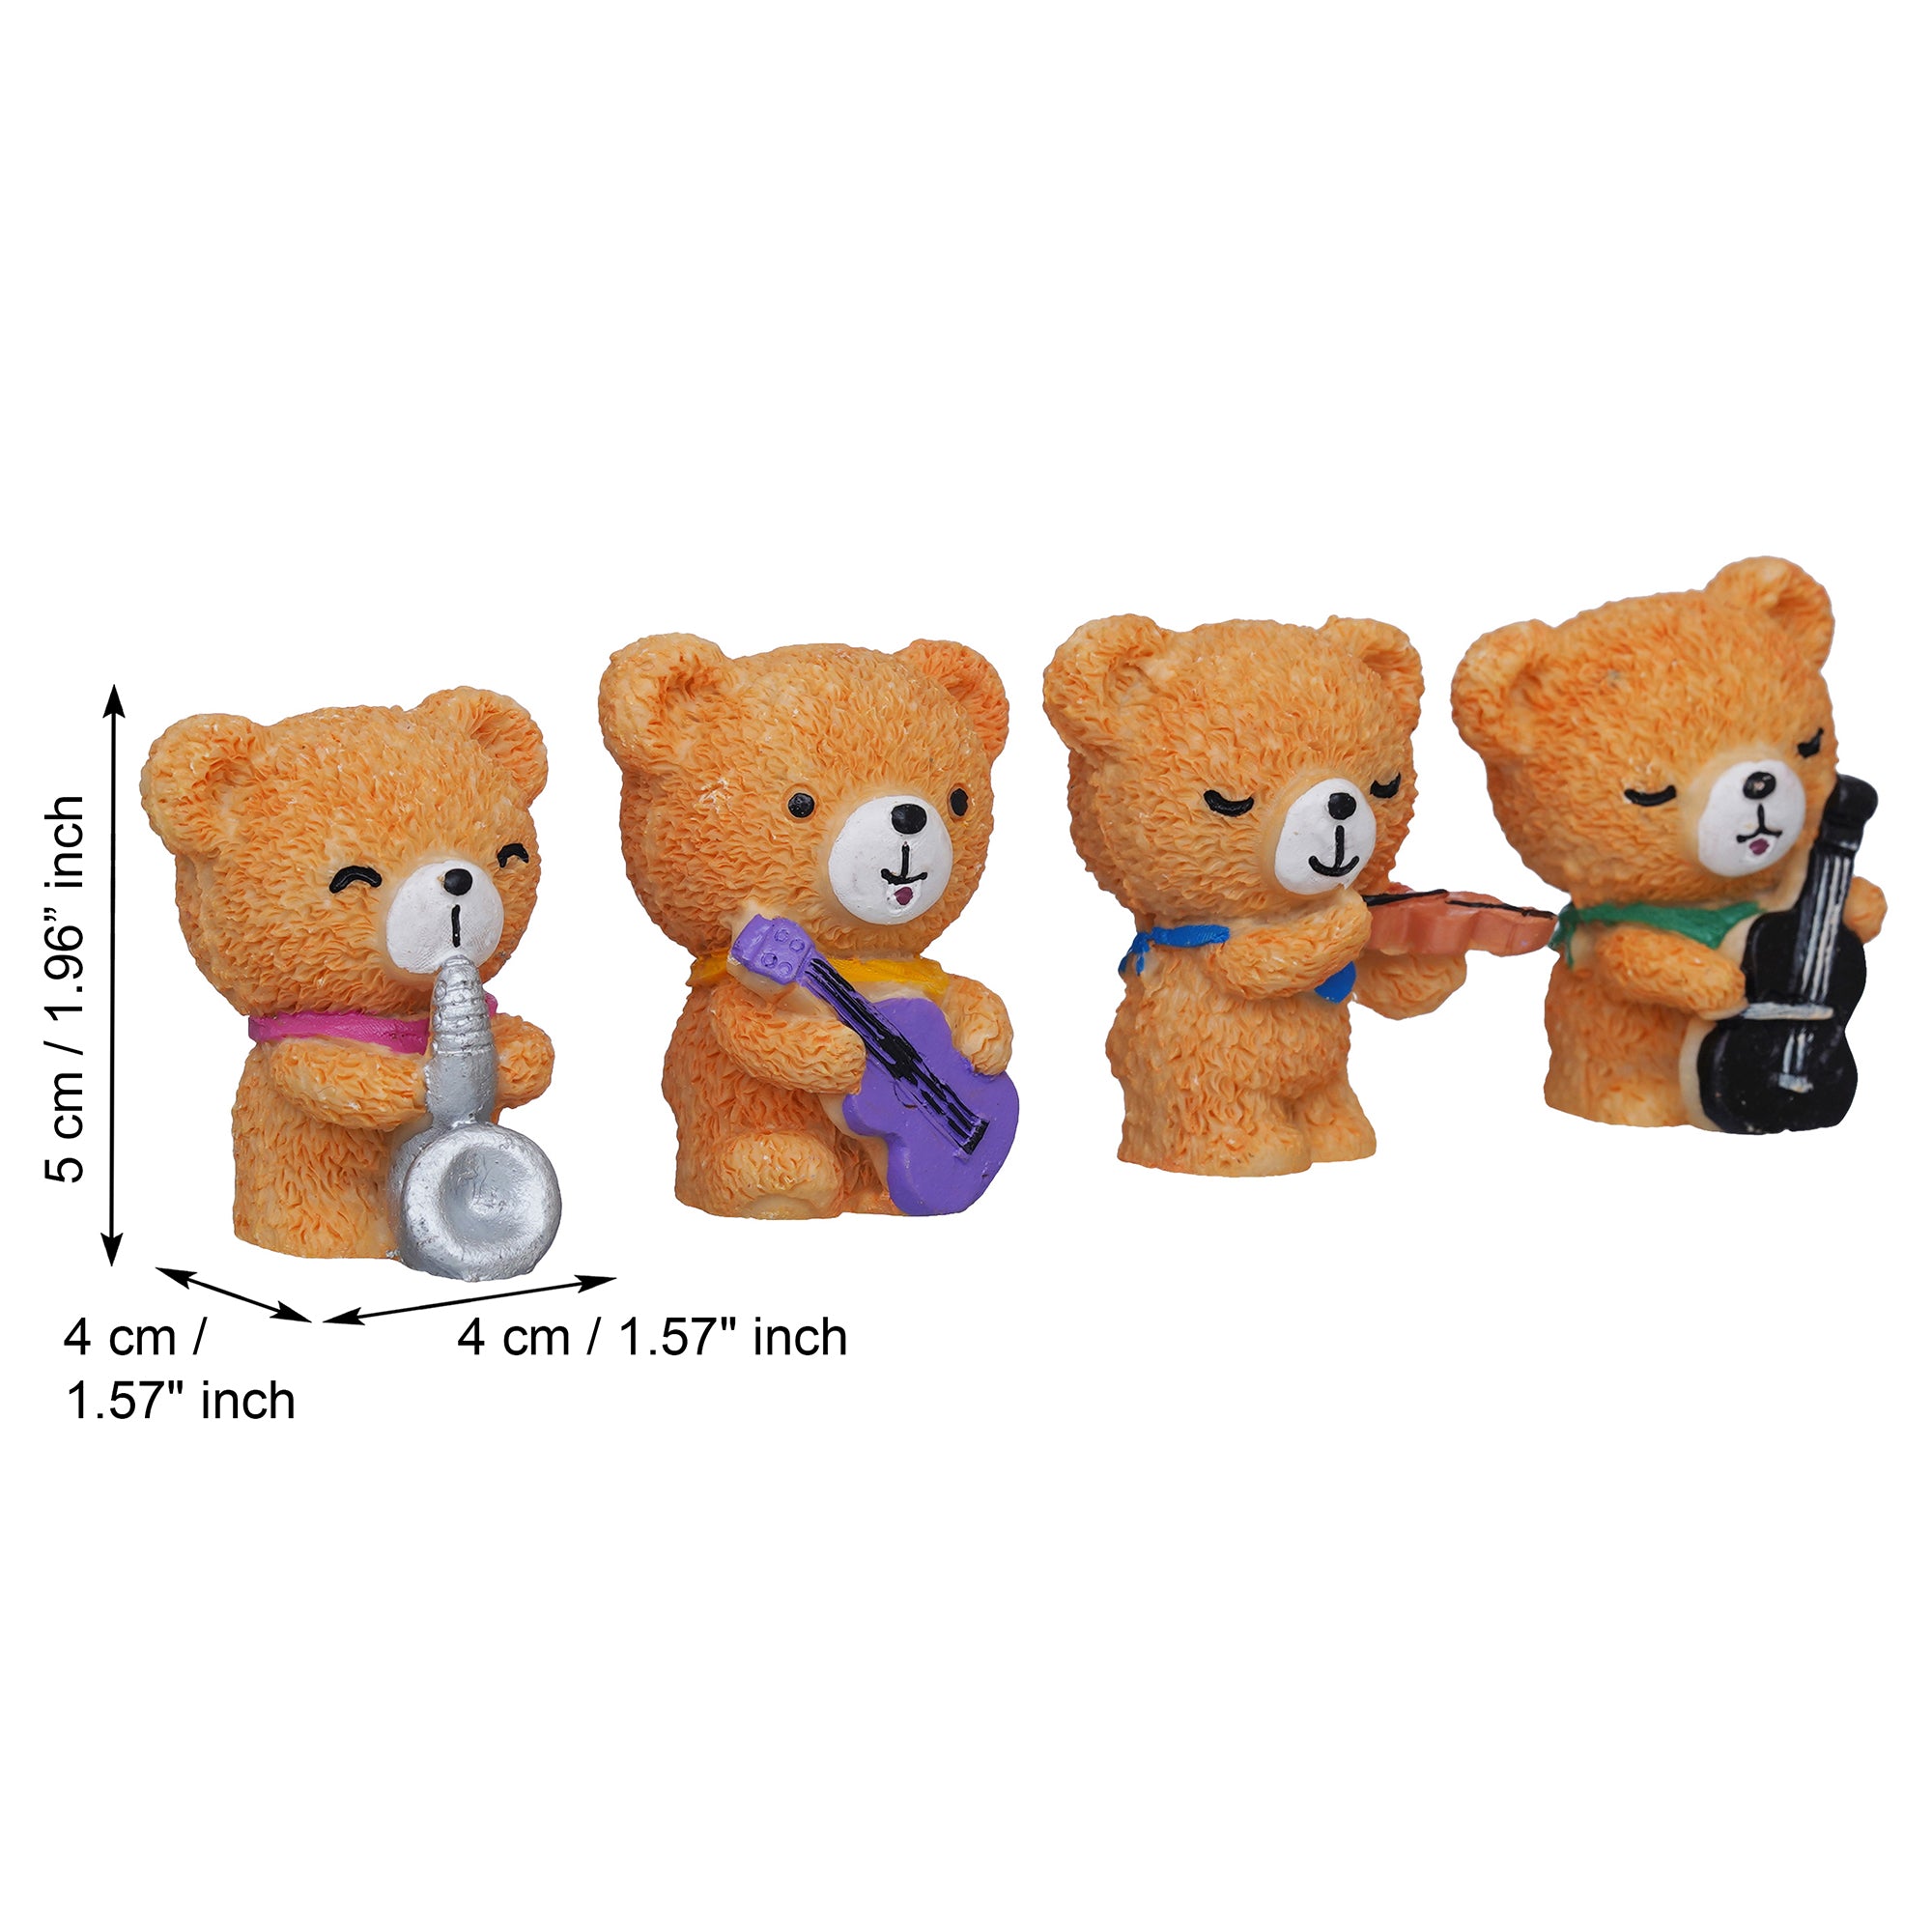 eCraftIndia Set of 4 Cute Teddy Bears Playing Musical Instruments Showpieces 3